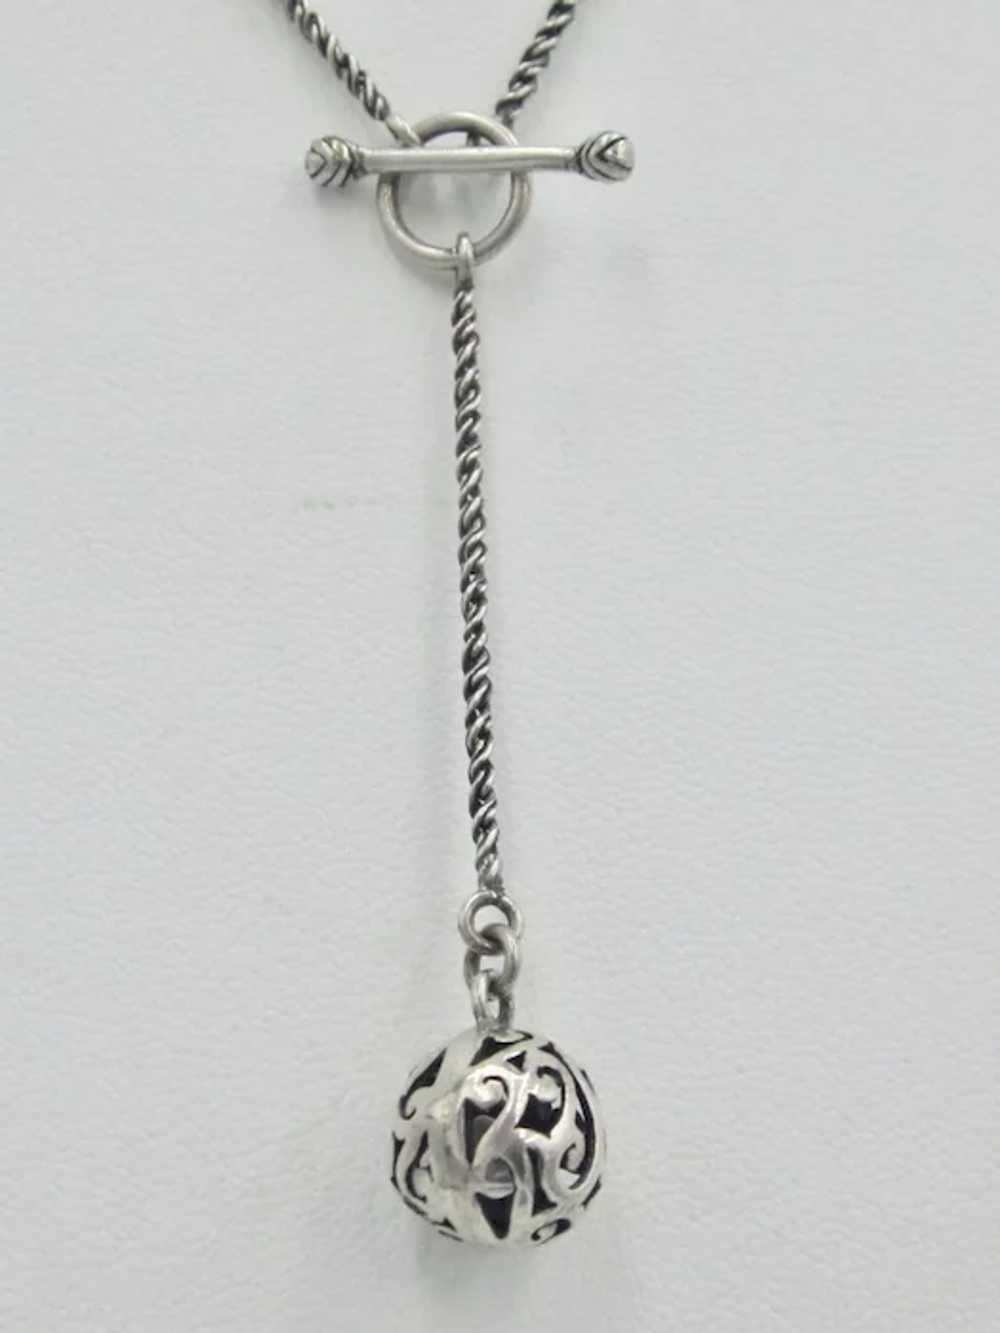 Vintage Sterling Silver Ball with Toggle Necklace - image 2